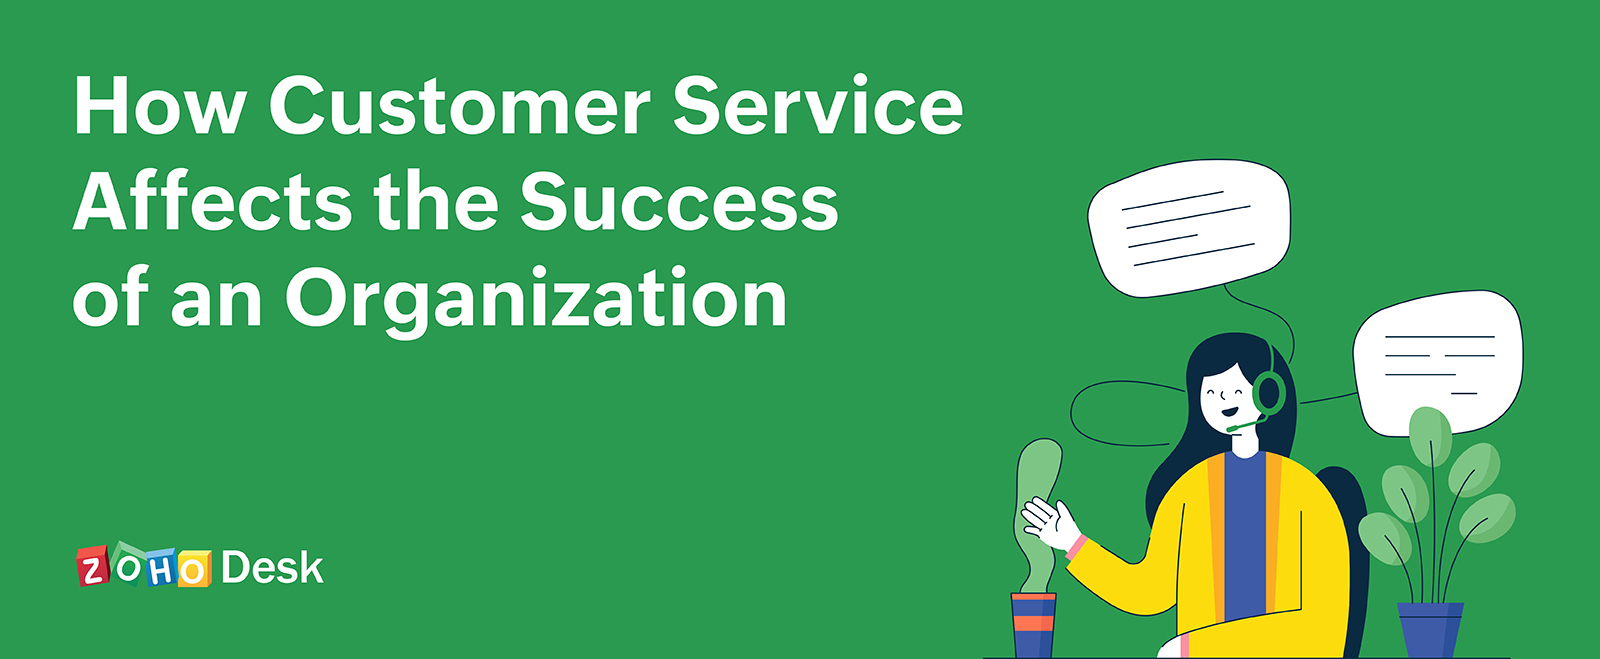 How Customer Service Affects the Success of an Organization